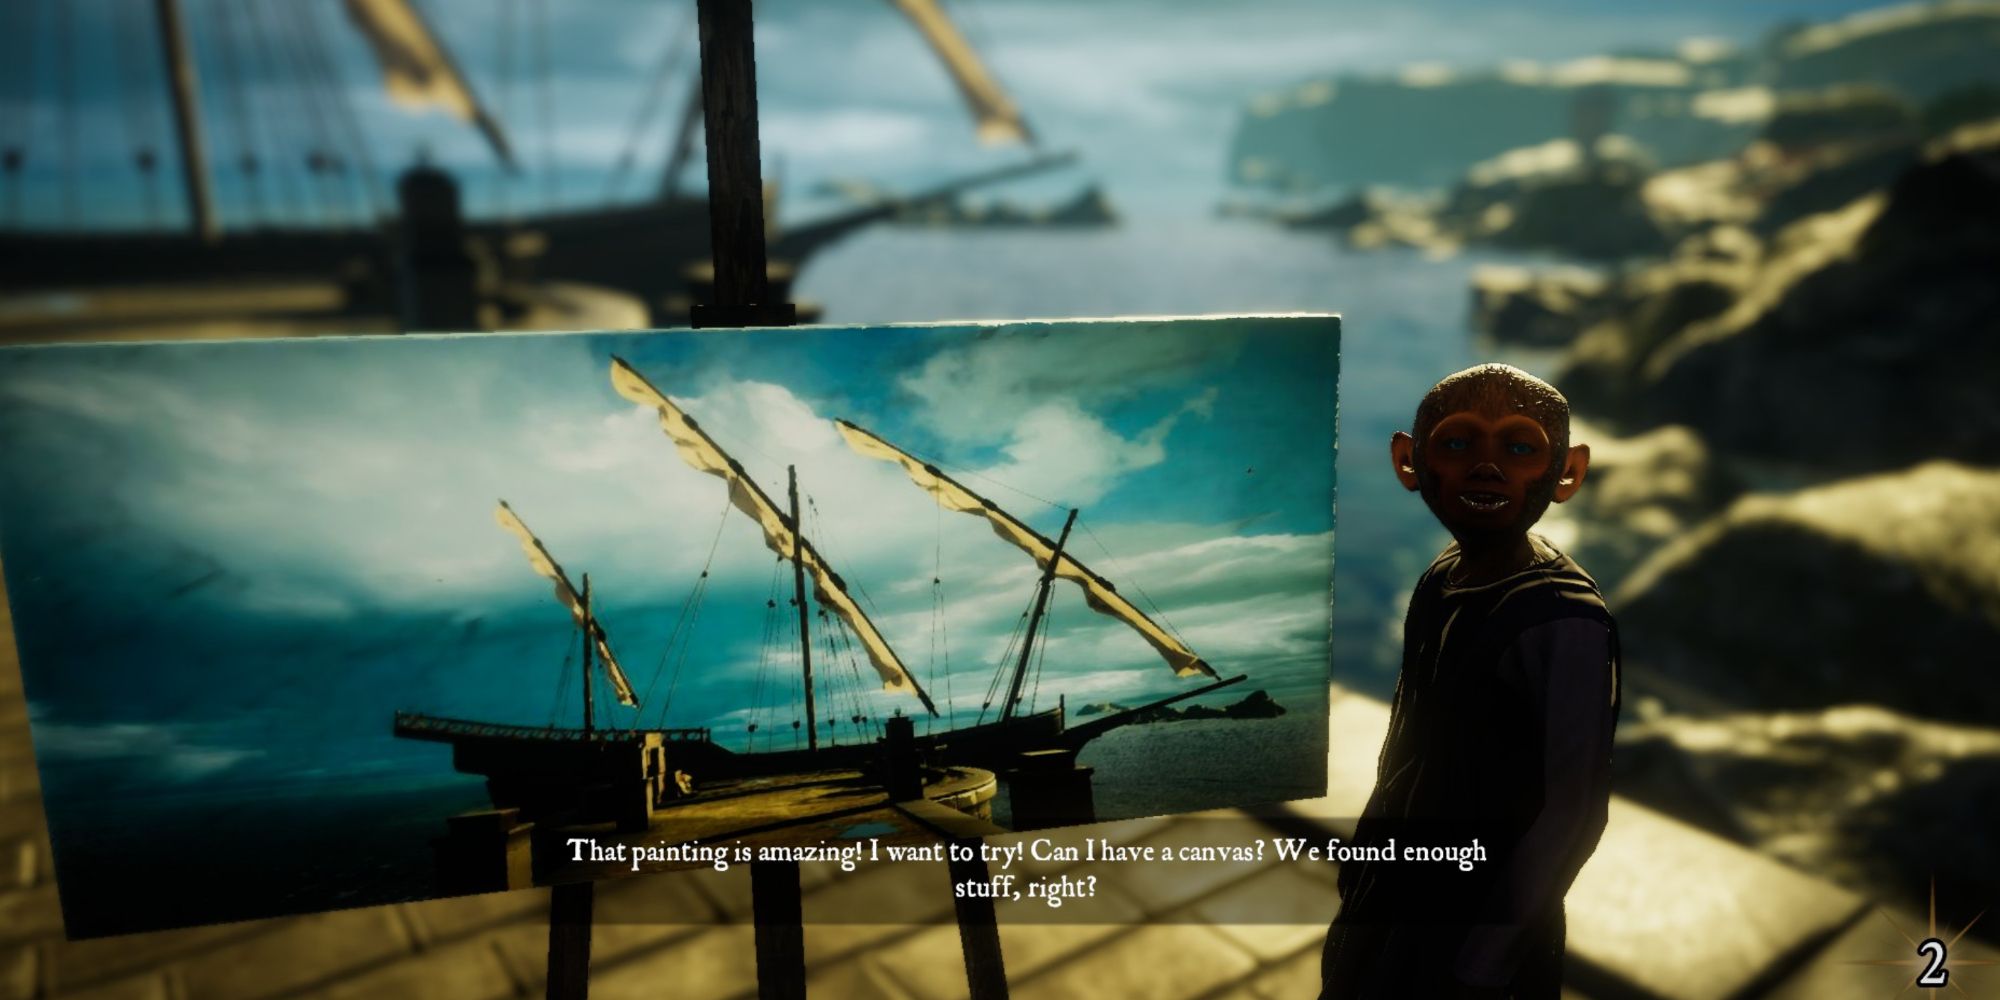 A monkey NPC commenting on art you made in Eastshade